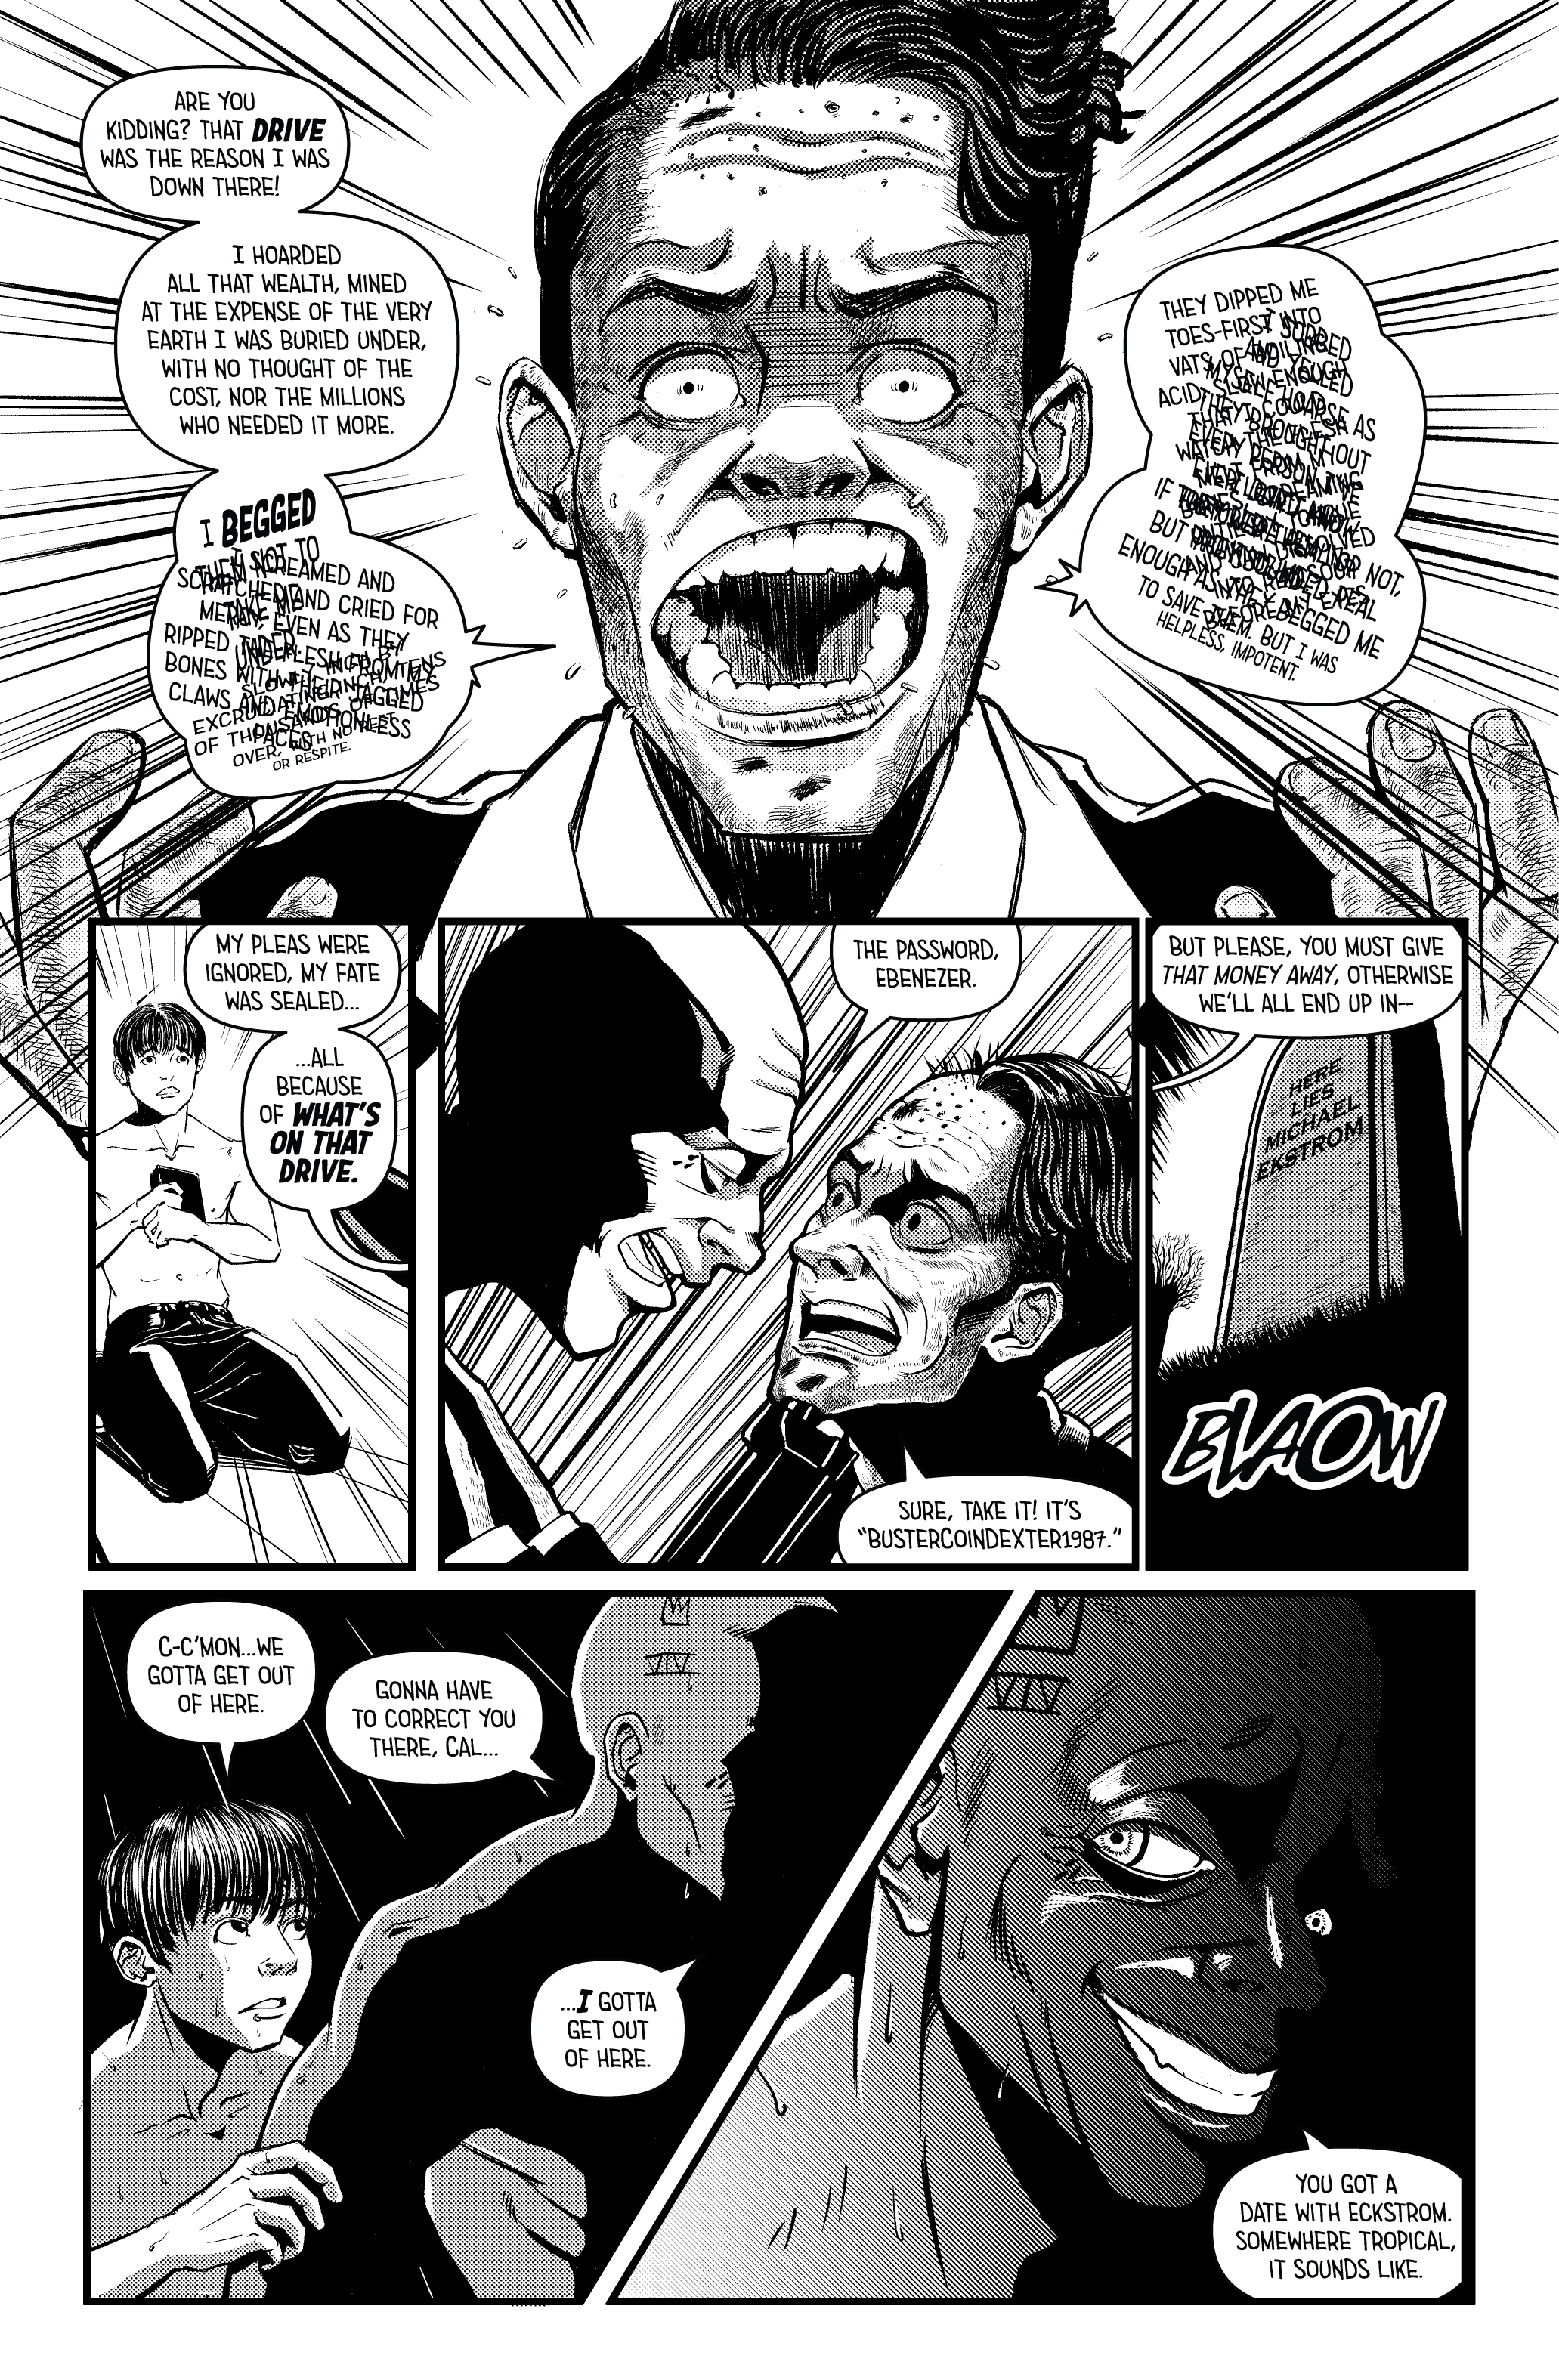 Monocul issue 07 story 01 pg 04 - Tales From The Crypto-01.png